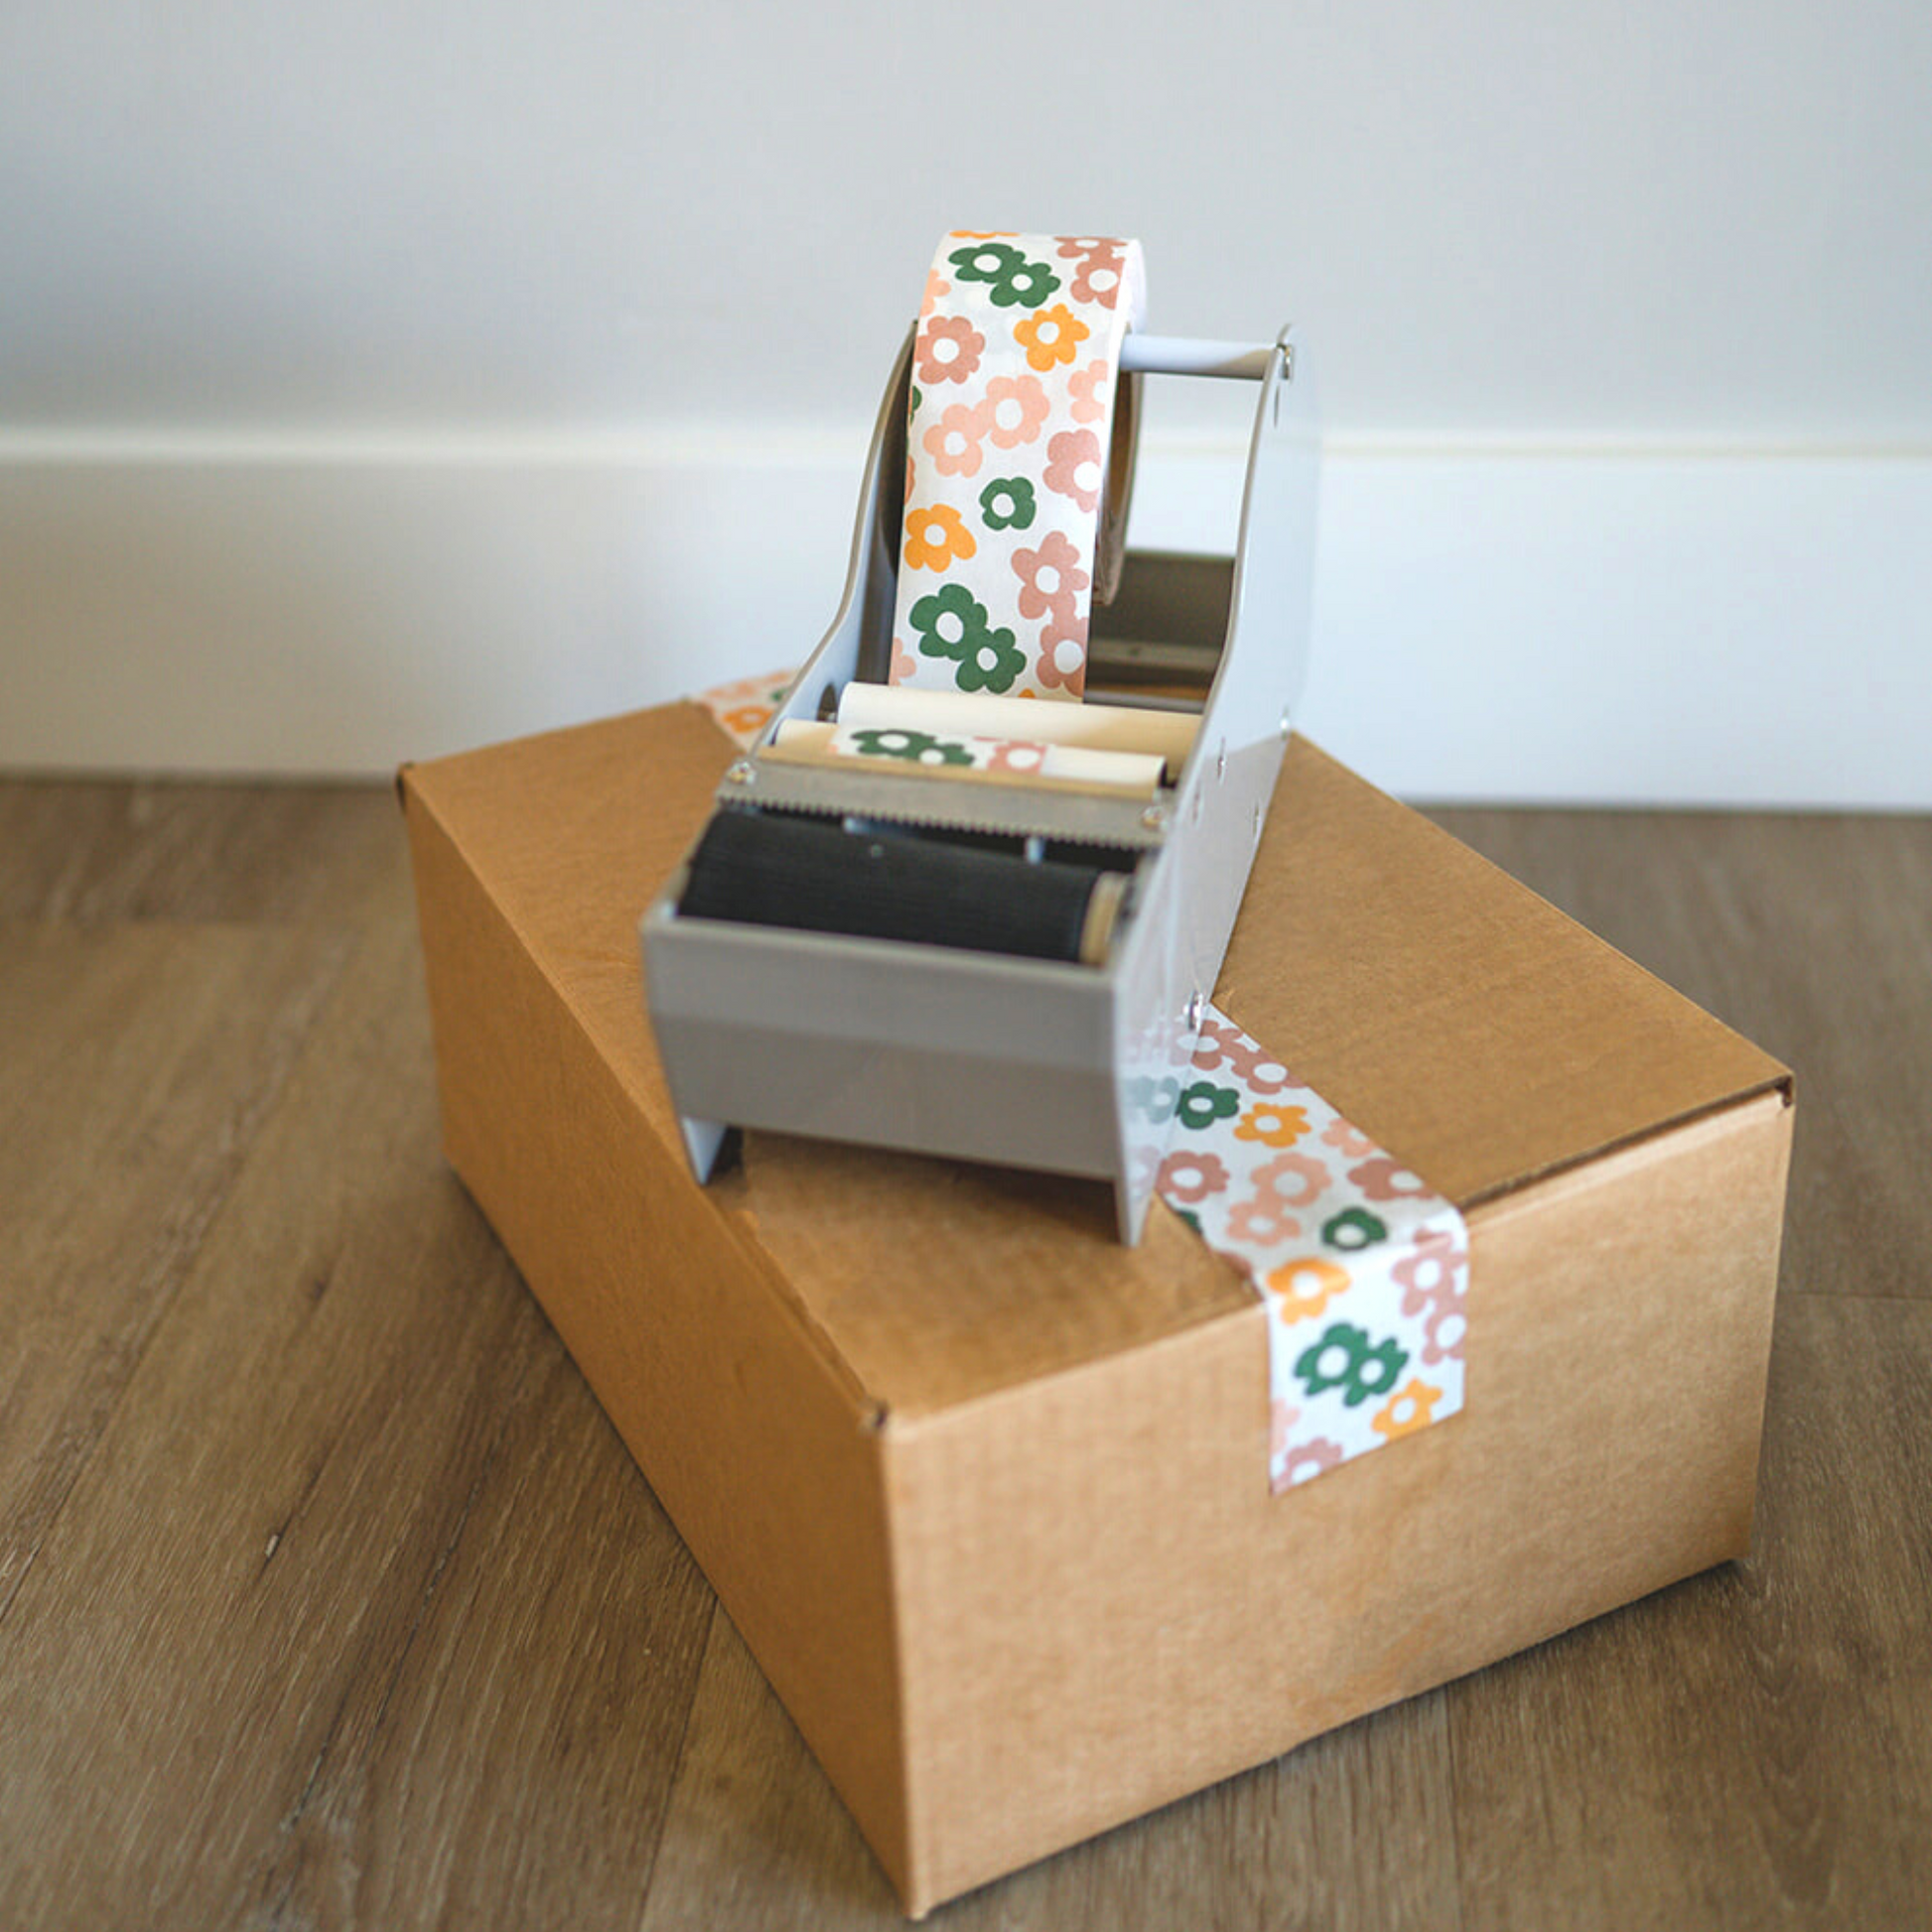 A Daisy Multi tape dispenser sits on top of a cardboard box - impack.co.